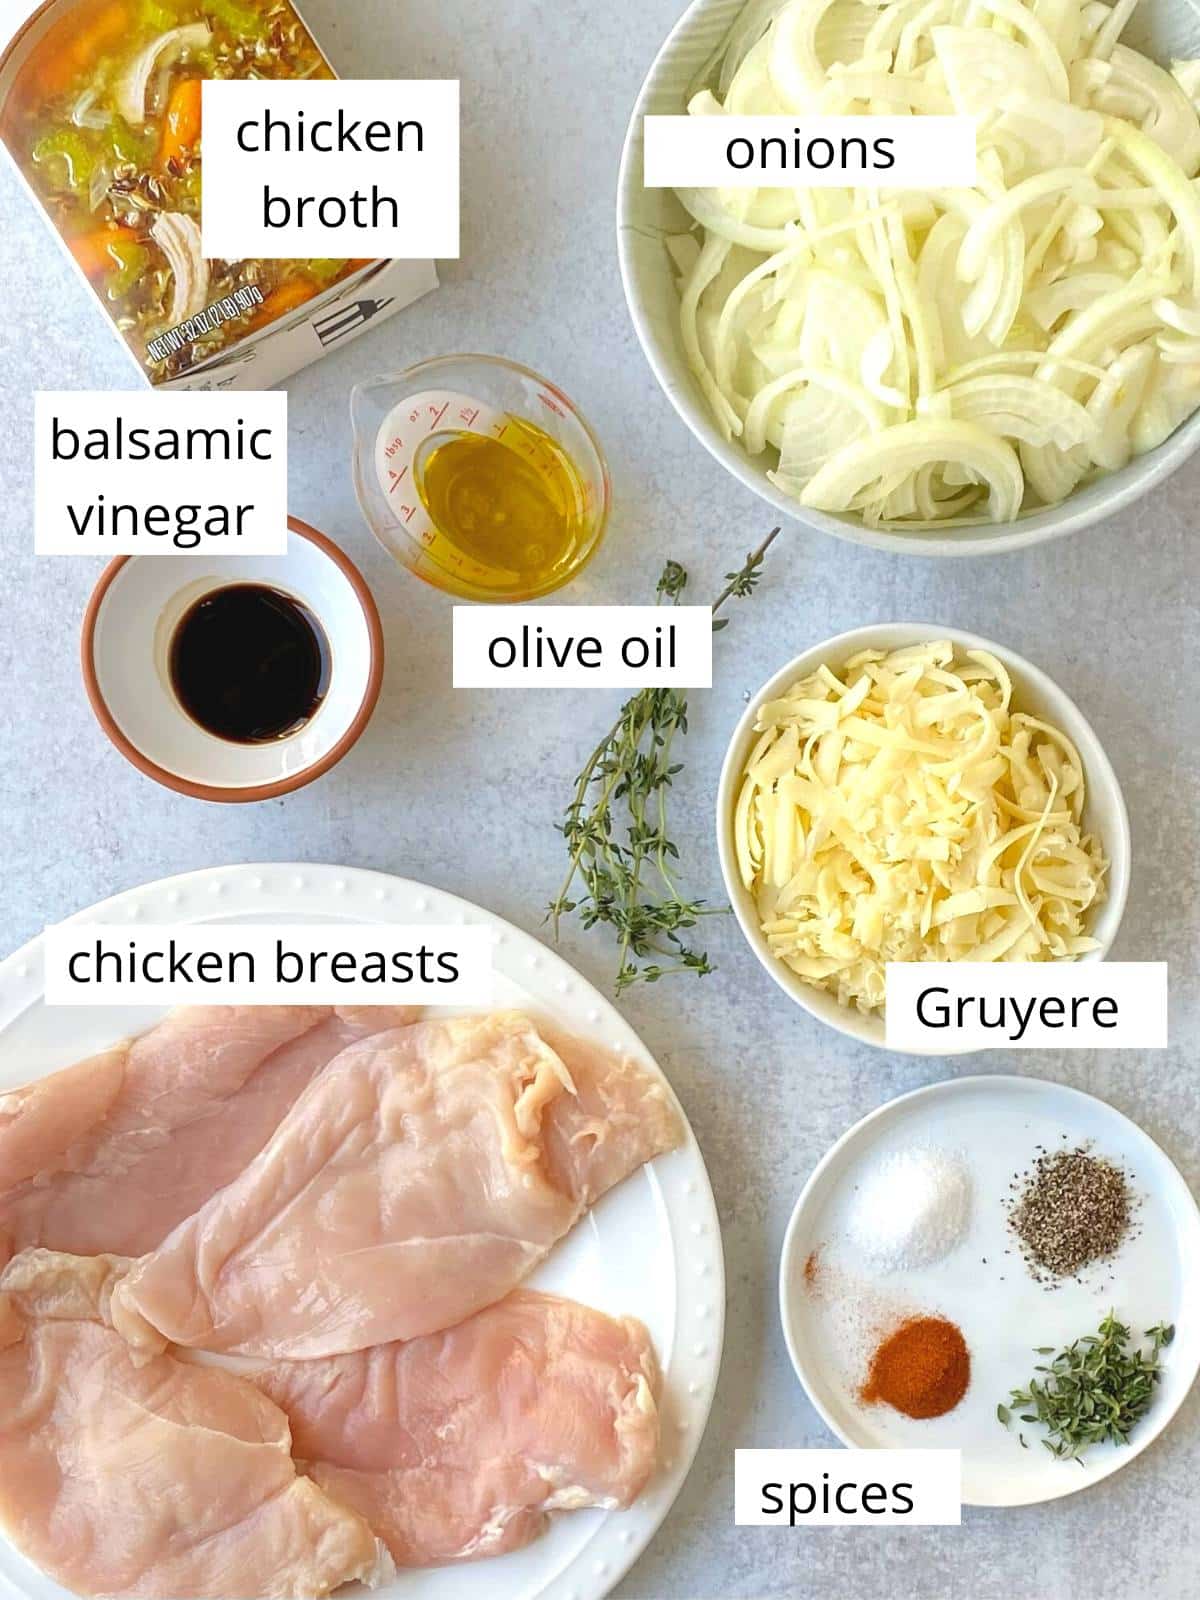 ingredients for french onion chicken skillet.